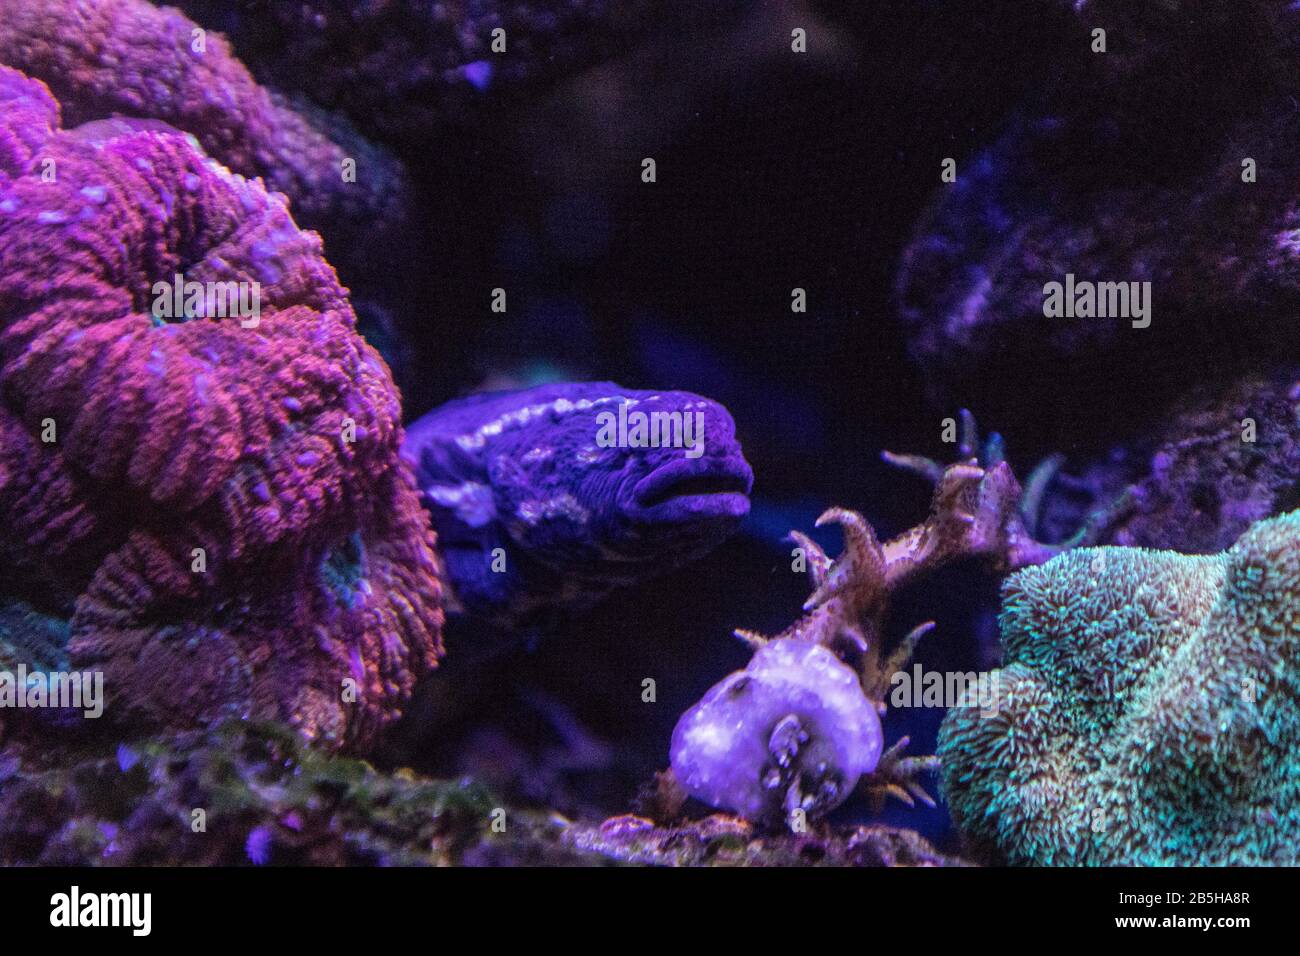 Convict blenny fish Pholidichthys leucotaenia hides in a coral reef. Stock Photo